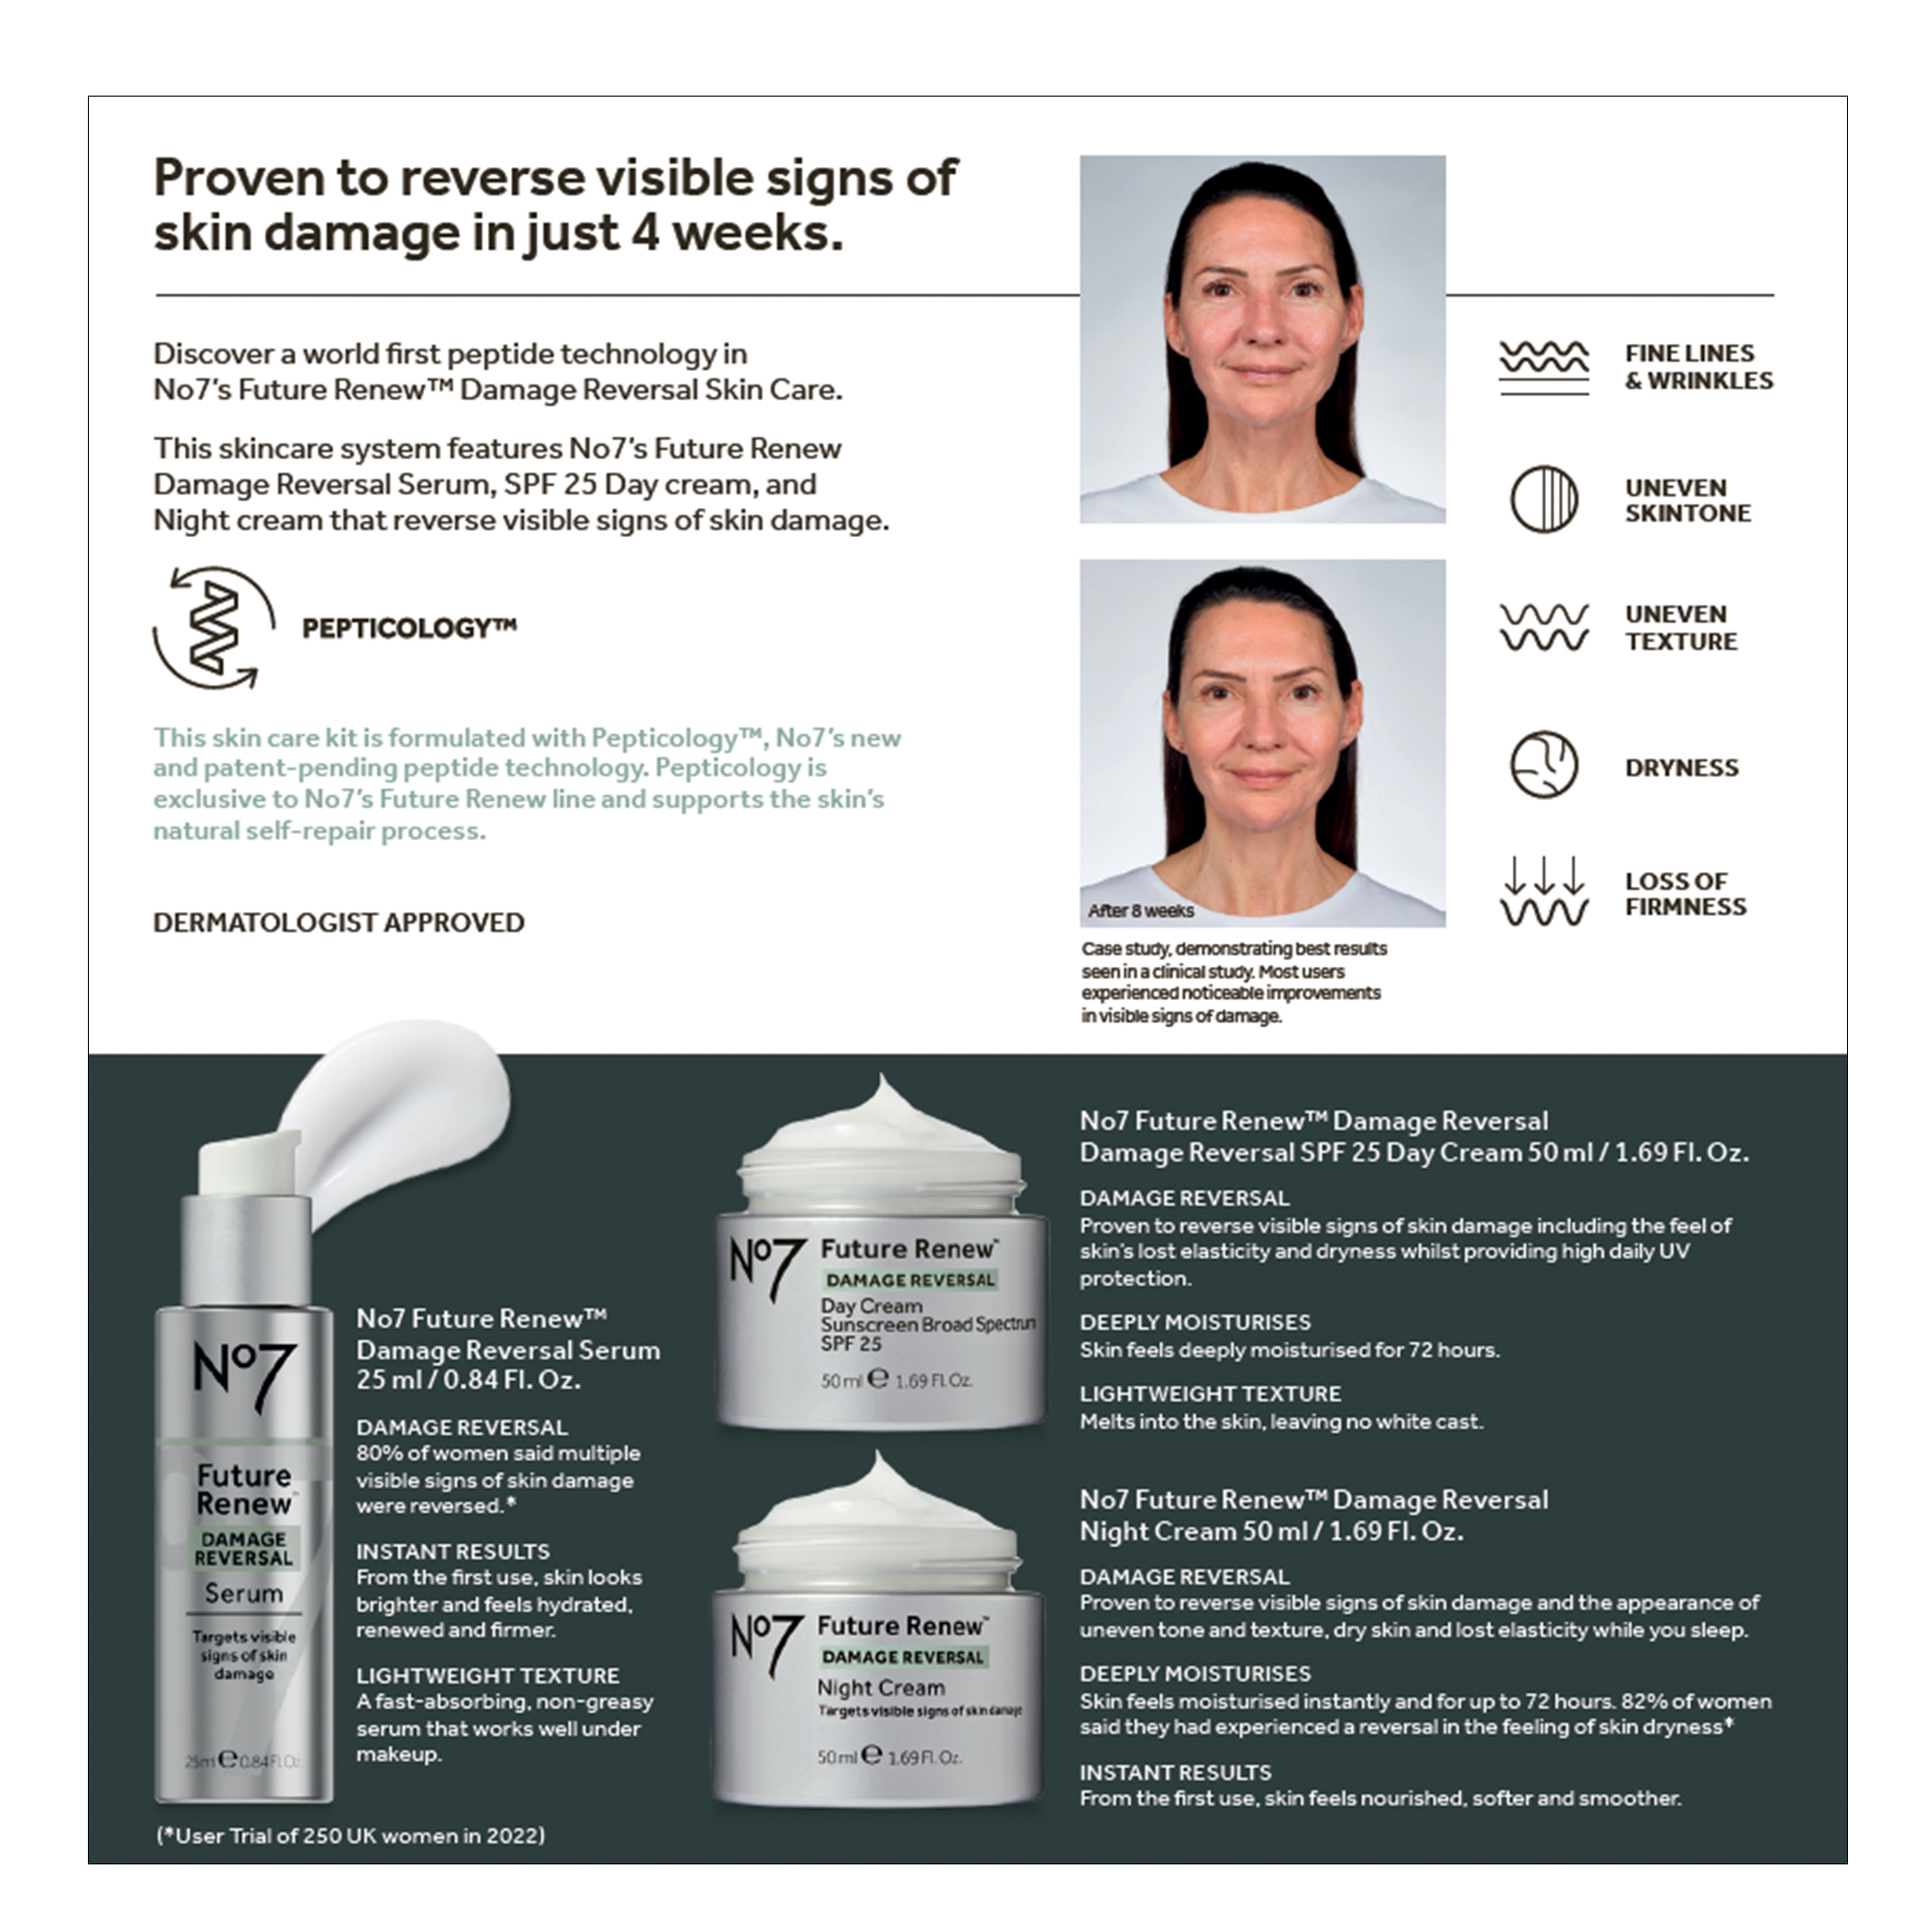 Proven to reverse visible signs of skin damage in just 4 weeks.
              Discover a world first peptide technology in No7's Future Renew ™ Damage Reversal Skin Care.
              This skincare system features No7's Future Renew Damage Reversal Serum, SPF 25 Day cream, and Night cream that reverse visible signs of skin damage.
              PEPTICOLOGY
              This skin care kit is formulated with Pepticology™, No7's new and patent-pending peptide technology. Pepticology is exclusive to No7's Future Renew line and supports the skin's natural self-repair process.
              DERMATOLOGIST APPROVED
              N°7 Future Renew DAMAGE REVERSAL Serum
              DAMAGE REVERSAL
              80% of women said multiple visible signs of skin damage were reversed.*
              INSTANT RESULTS
              From the first use, skin looks brighter and feels hydrated. renewed and firmer.
              LIGHTWEIGHT TEXTURE
              A fast-absorbing, non-greasy serum that works well under makeup.
              (*User Trial of 250 UK women in 2022)
              No7 Future Renew DAMAGE REVERSAL Night Cream
              Targets visible signs of sain canaye
              50 ml E 1.69 FOr.
              FINE LINES & WRINKLES
              UNEVEN SKINTONE
              UNEVEN TEXTURE
              DRYNESS
              LOSS OF FIRMNESS
              After 8 weeks
              Case study, demonstrating best results seen in a clinical study. Most users
              in visible signs of damage.
              No7 Future Renew Damage Reversal
              Proven to reverse visible signs of skin damage including the feel of skin's lost elasticity and dryness whilst providing high daily UV protection.
              DEEPLY MOISTURISES
              Skin feels deeply moisturised for 72 hours.
              LIGHTWEIGHT TEXTURE
              Melts into the skin, leaving no white cast.
              No7 Future Renew™ Damage Reversal
              Night Cream 50 ml / 1.69 Fl. Oz.
              DAMAGE REVERSAL
              Proven to reverse visible signs of skin damage and the appearance of uneven tone and texture, dry skin and lost elasticity while you sleep.
              DEEPLY MOISTURISES
              Skin feels moisturised instantly and for up to 72 hours. 82% of women said they had experienced a reversal in the feeling of skin dryness*
              INSTANT RESULTS
              From the first use, skin feels nourished, softer and smoother.